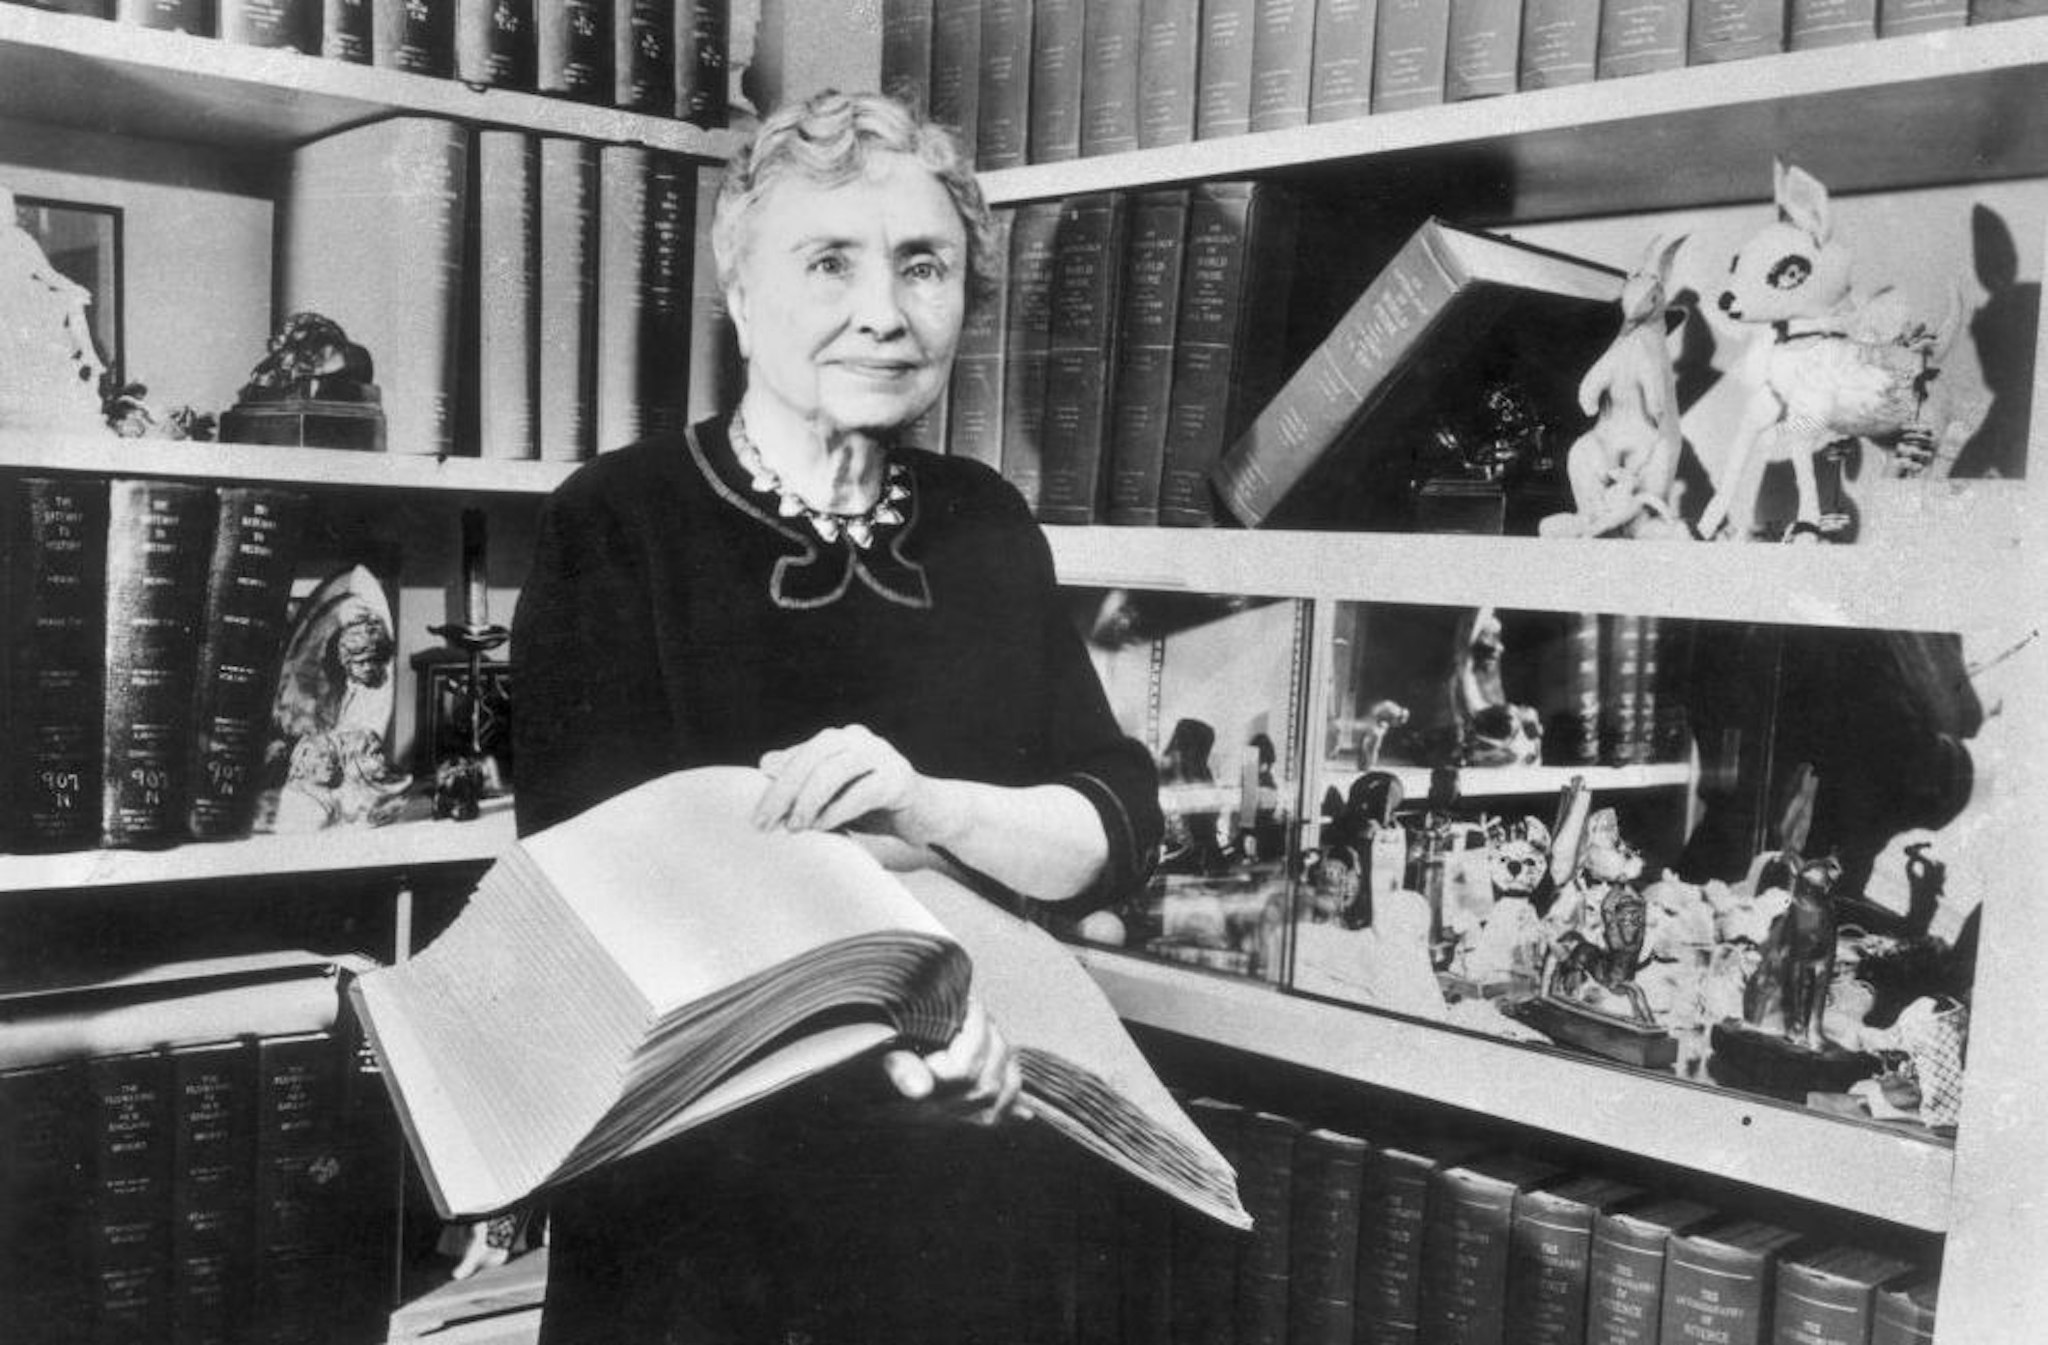 1956: Portrait of American writer, educator and advocate for the disabled Helen Keller (1880 - 1968) holding a Braille volume and surrounded by shelves containing books and decorative figurines. A childhood illness left Keller blind, deaf and mute.